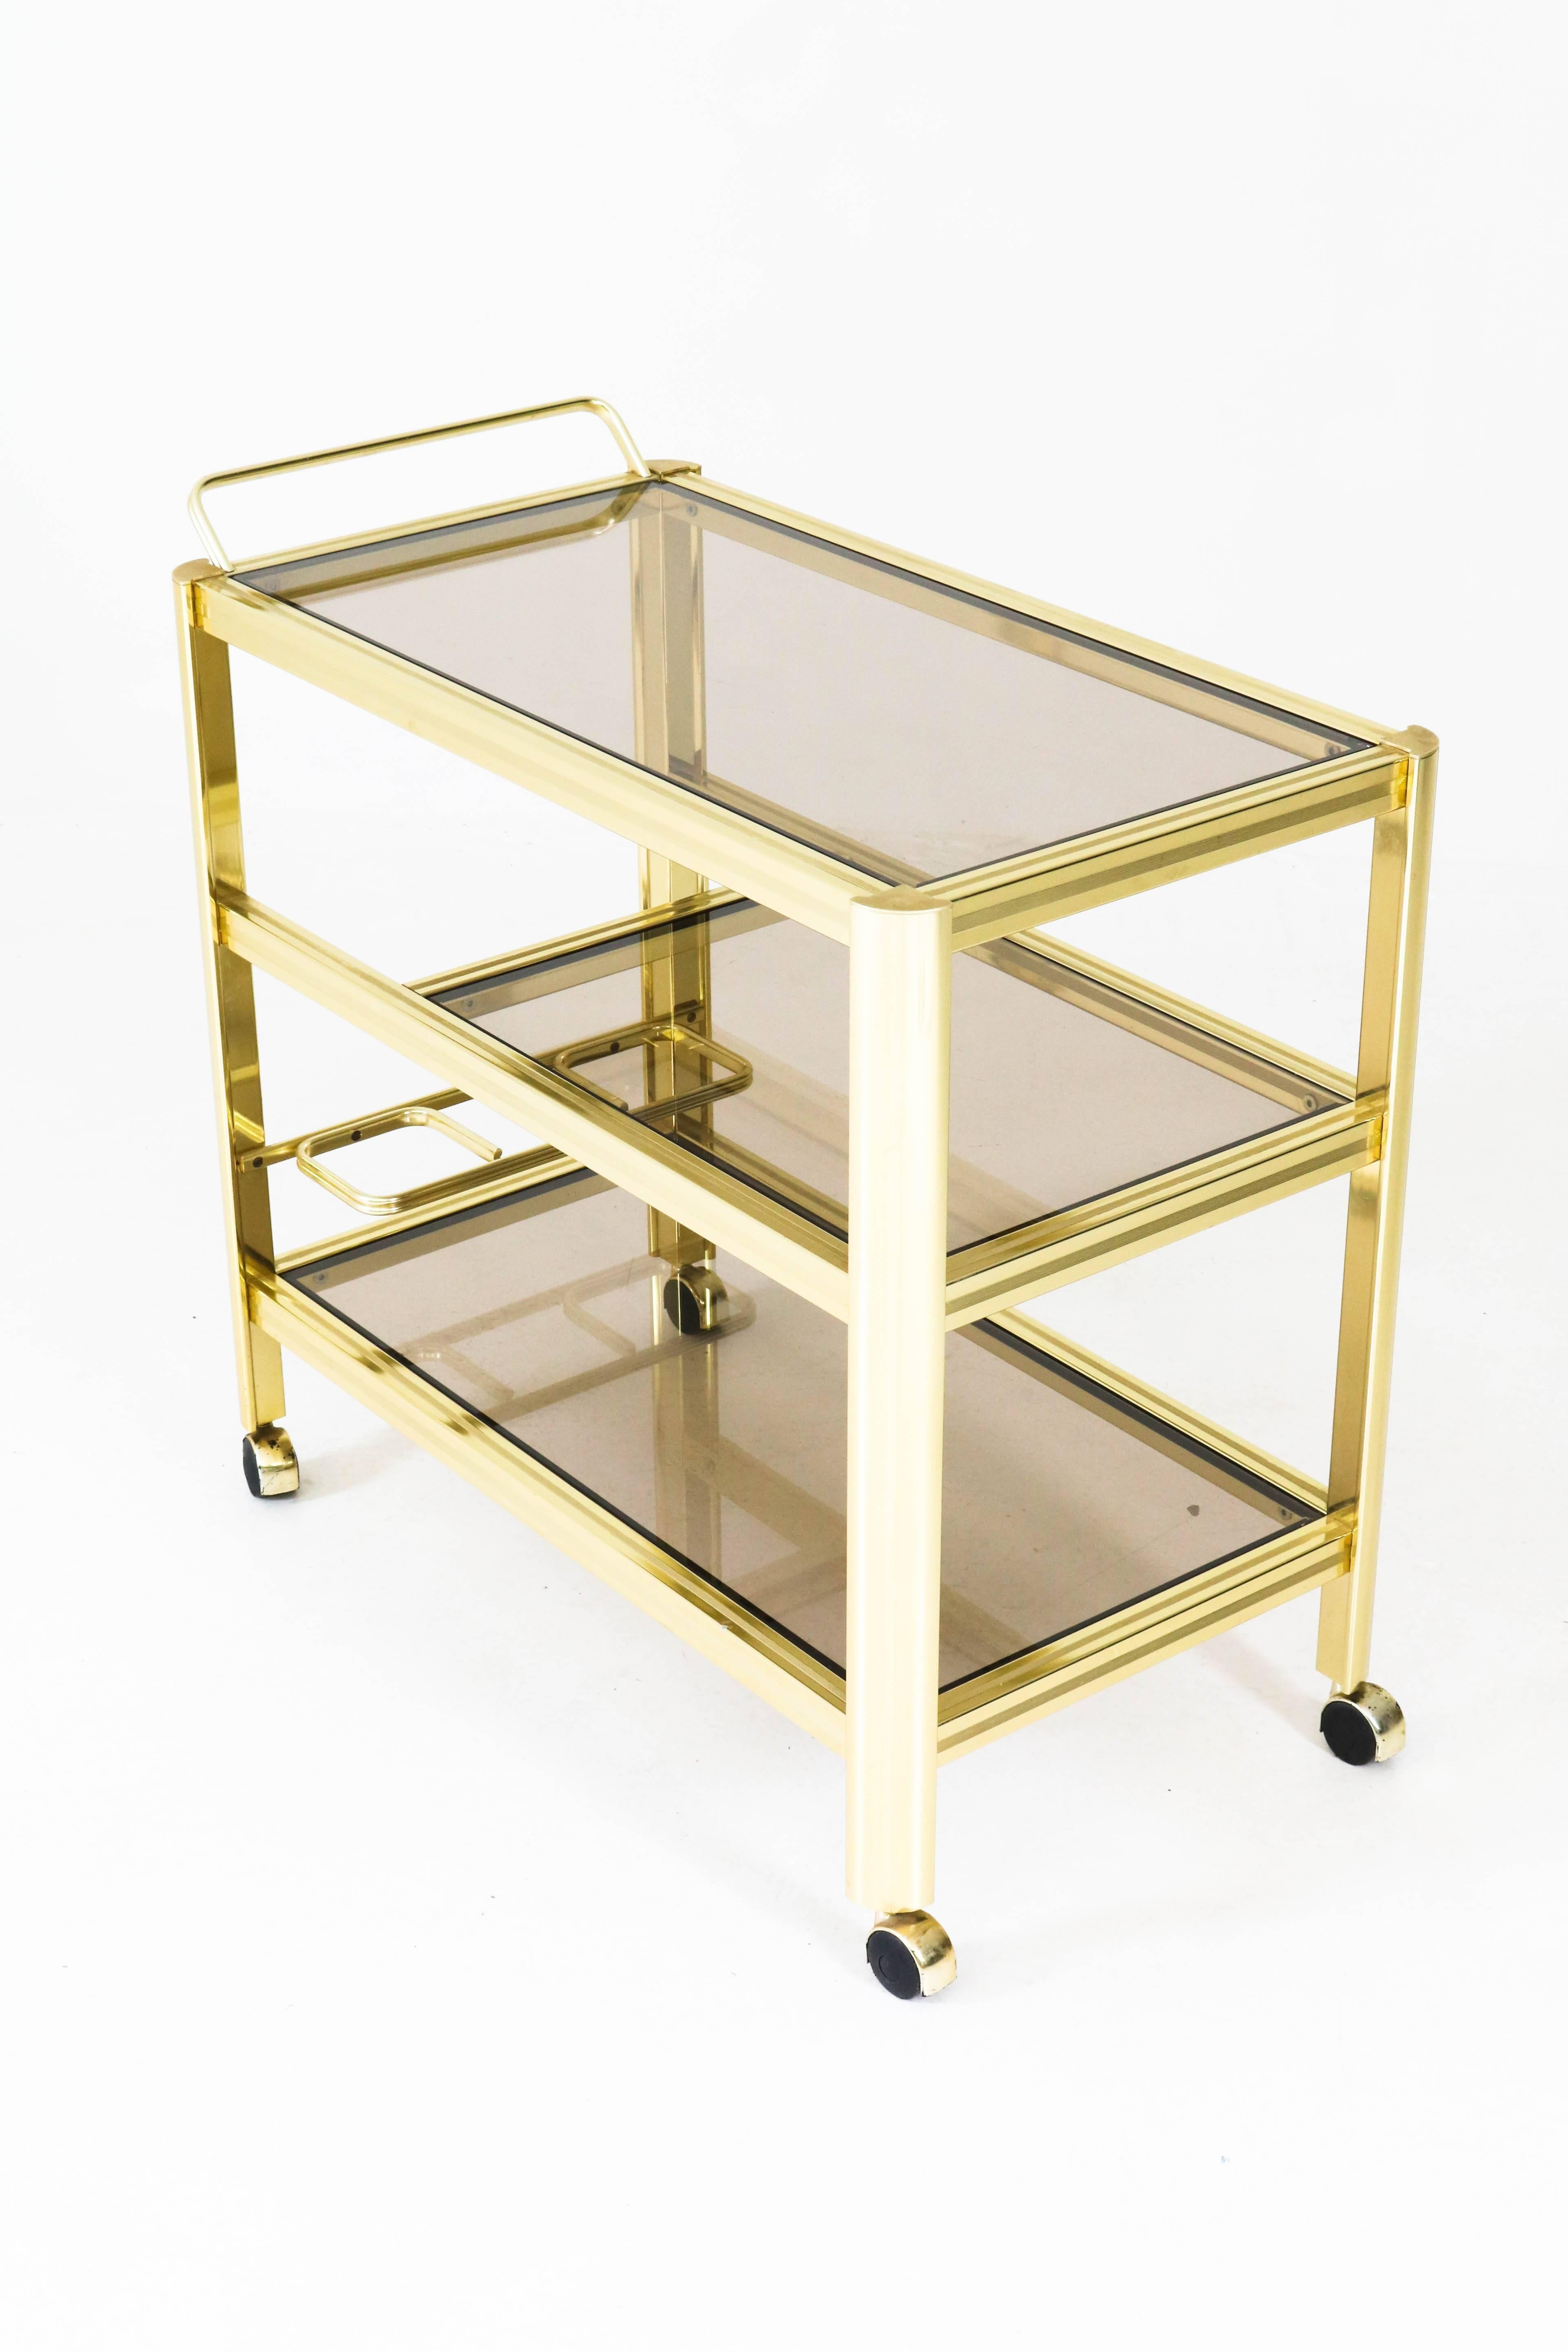 Stunning Mid-Century Modern cocktail trolley, 1970s.
Gilded metal with three original smoke glass tops.
Elegant design from the 1970s.
See picture 5 for the only damage on the trolley.
In good original condition with minor wear consistent with